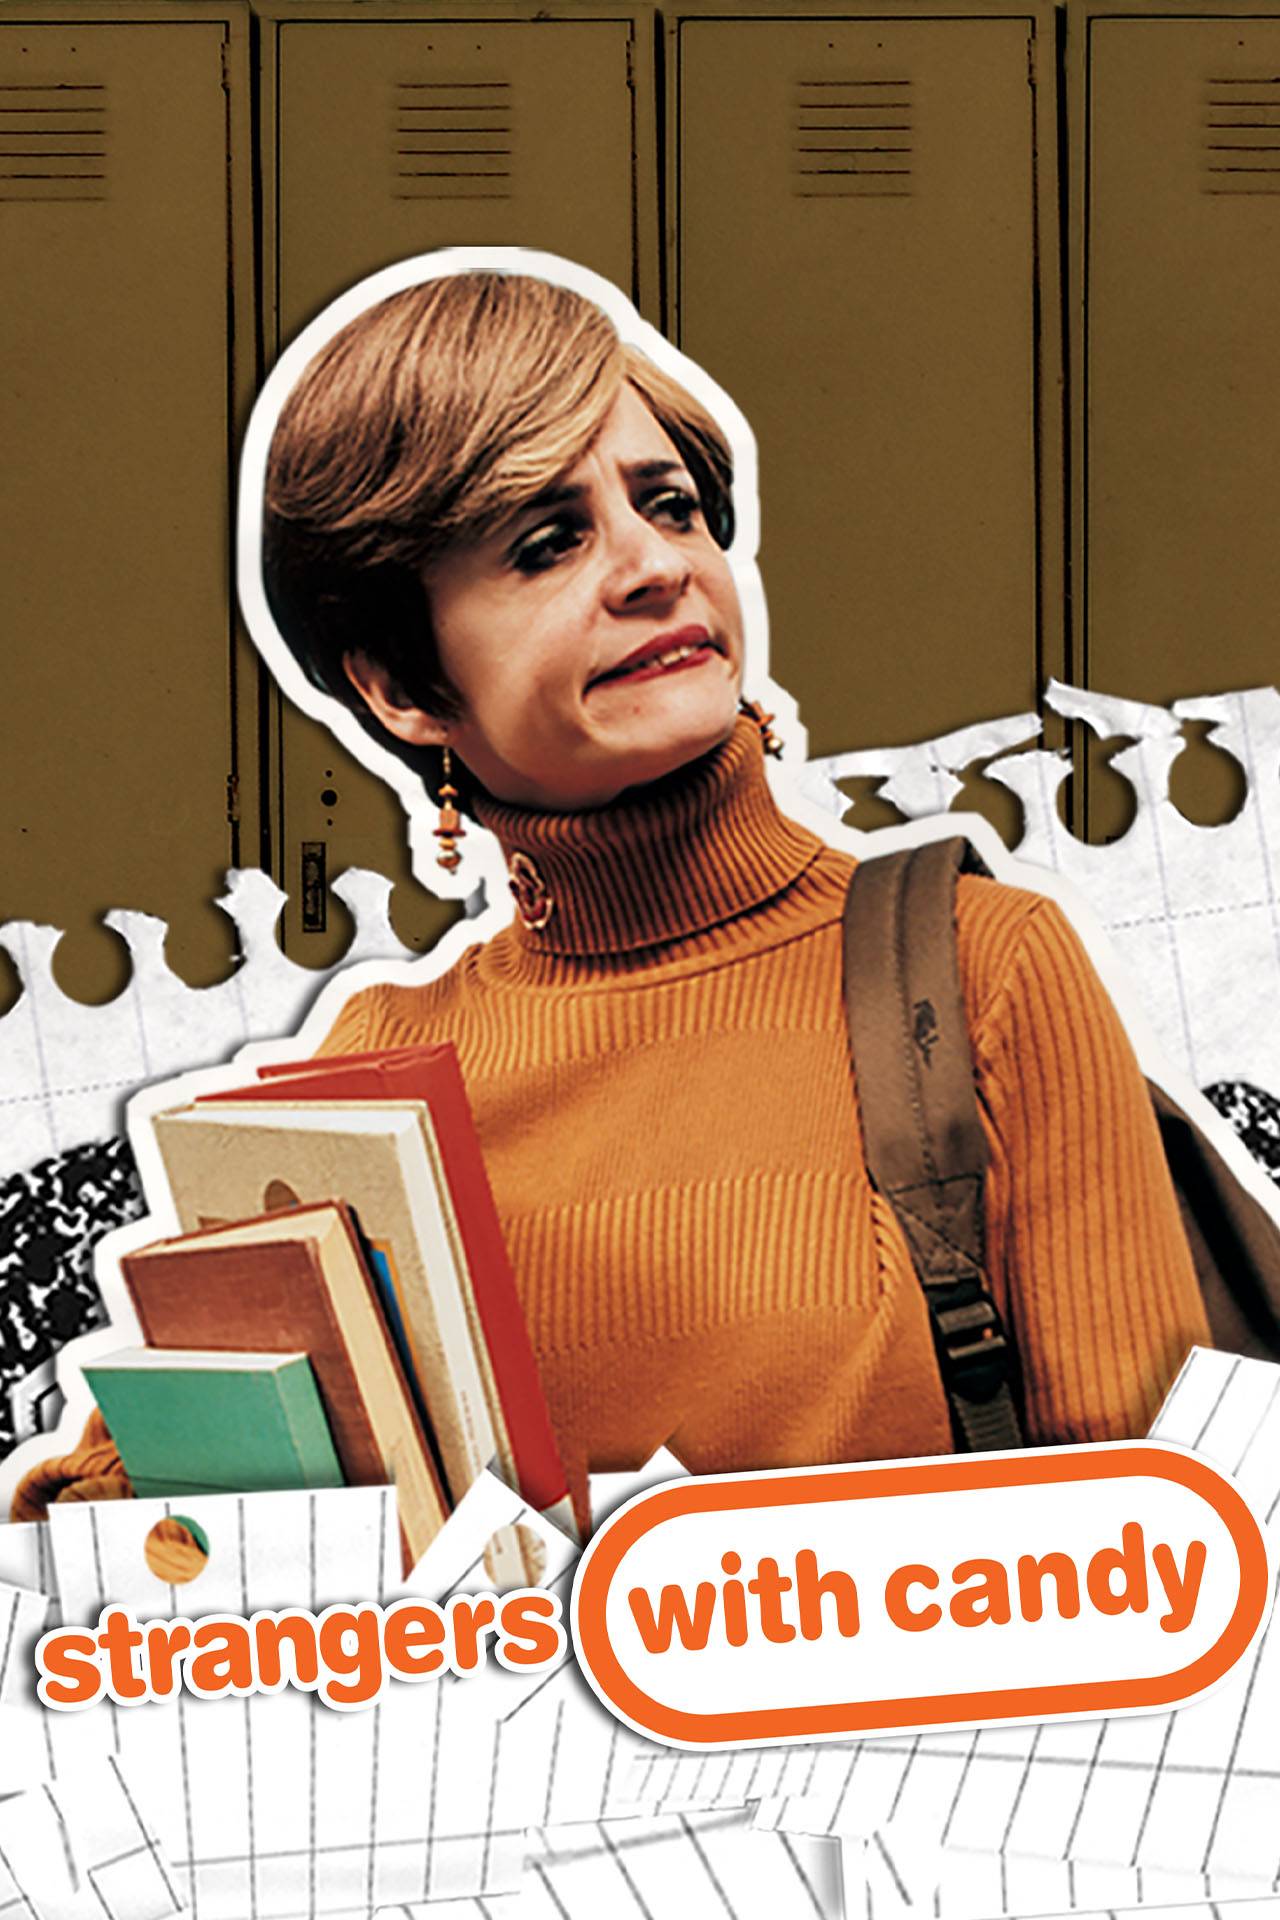 Strangers with Candy - TV Series